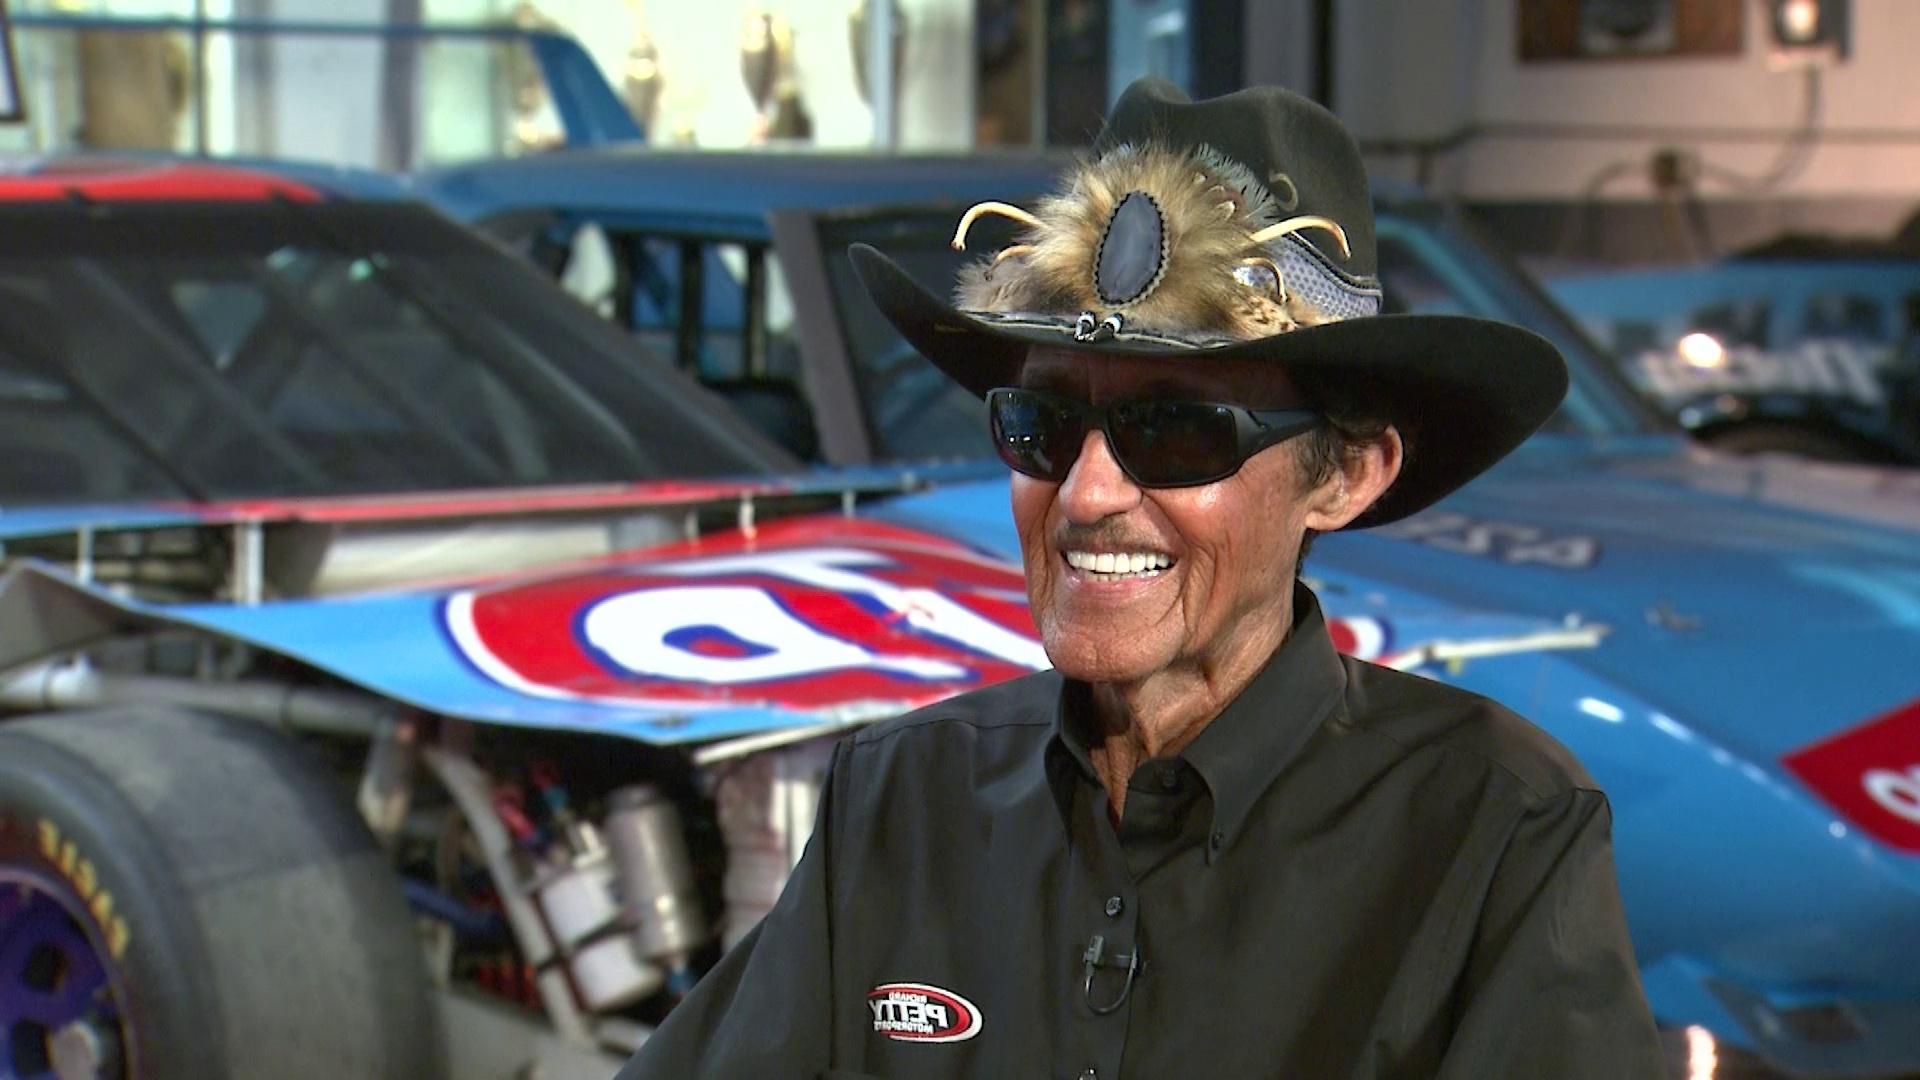 Richard Petty in a cowboy hat smiling with race cars behind him.